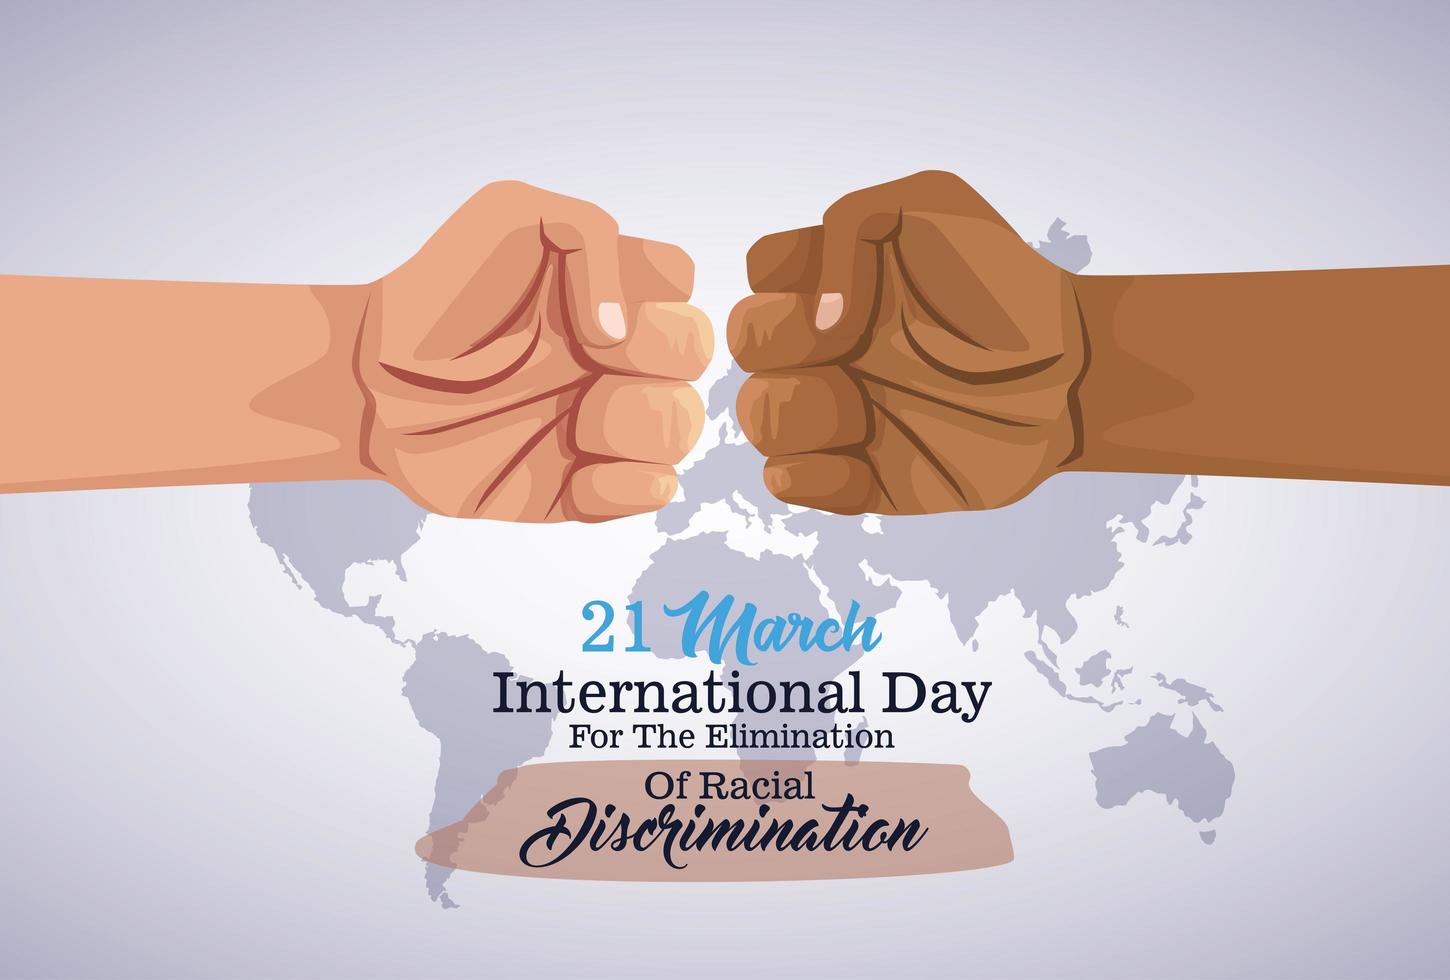 stop racism international day poster with hands fist crash vector